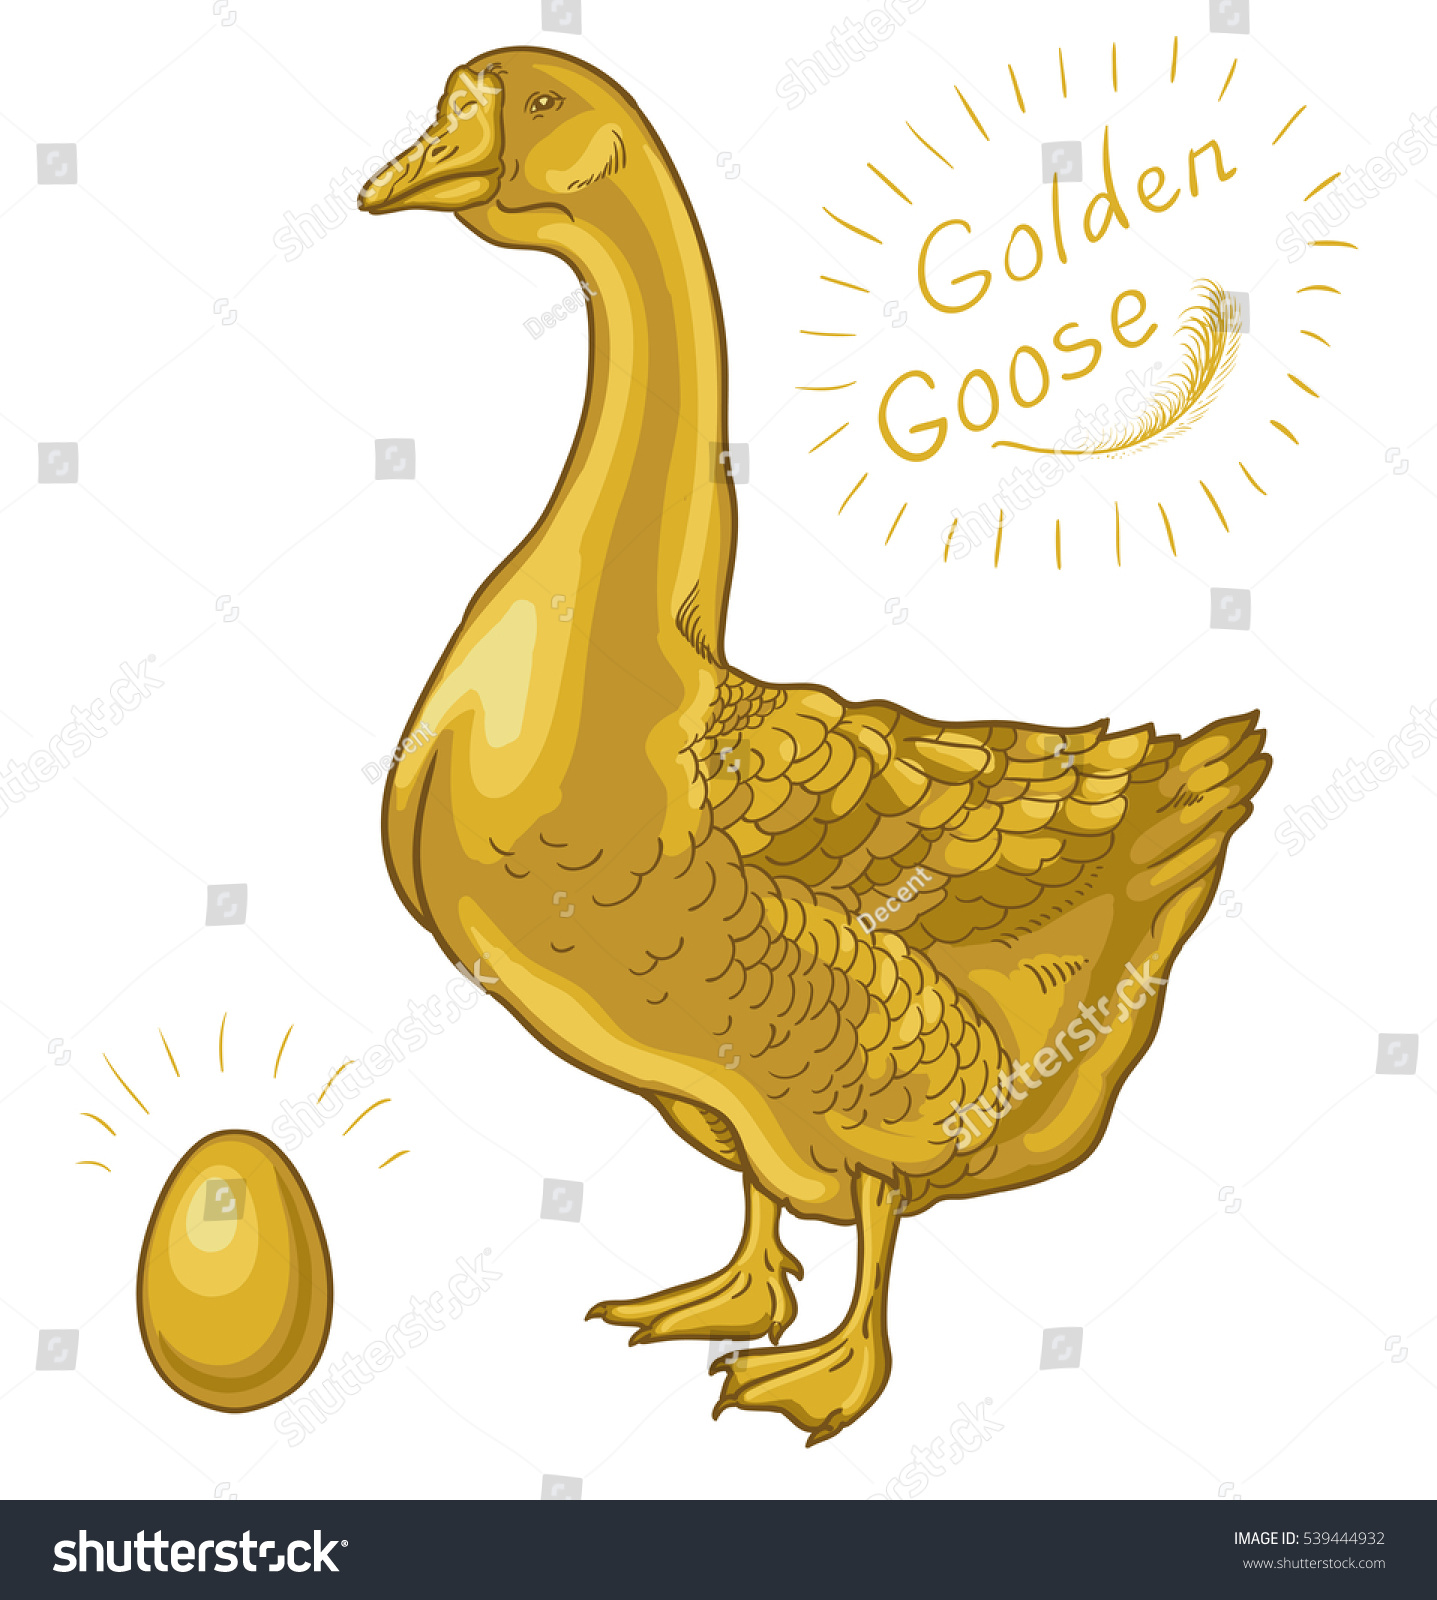 Image result for PICTURE OF GOLDEN GOOSE AND EGG